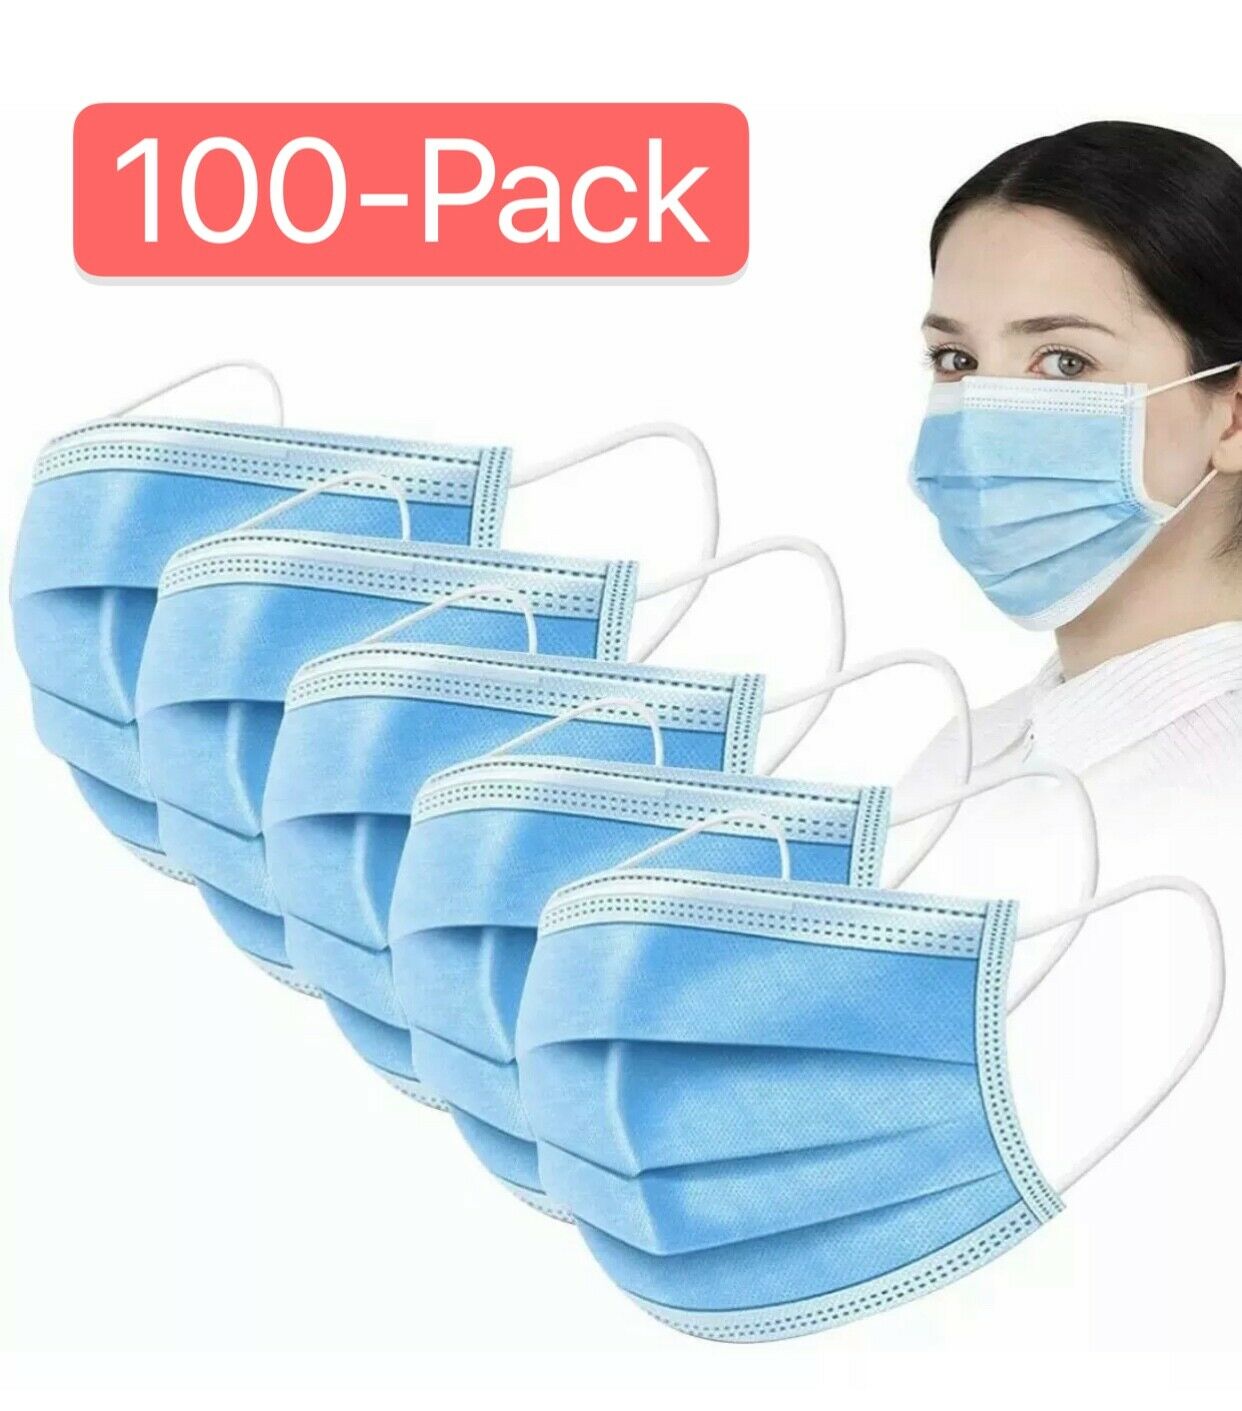 100 Pcs Blue Face Mask Mouth & Nose Protecting Families Easy Safe